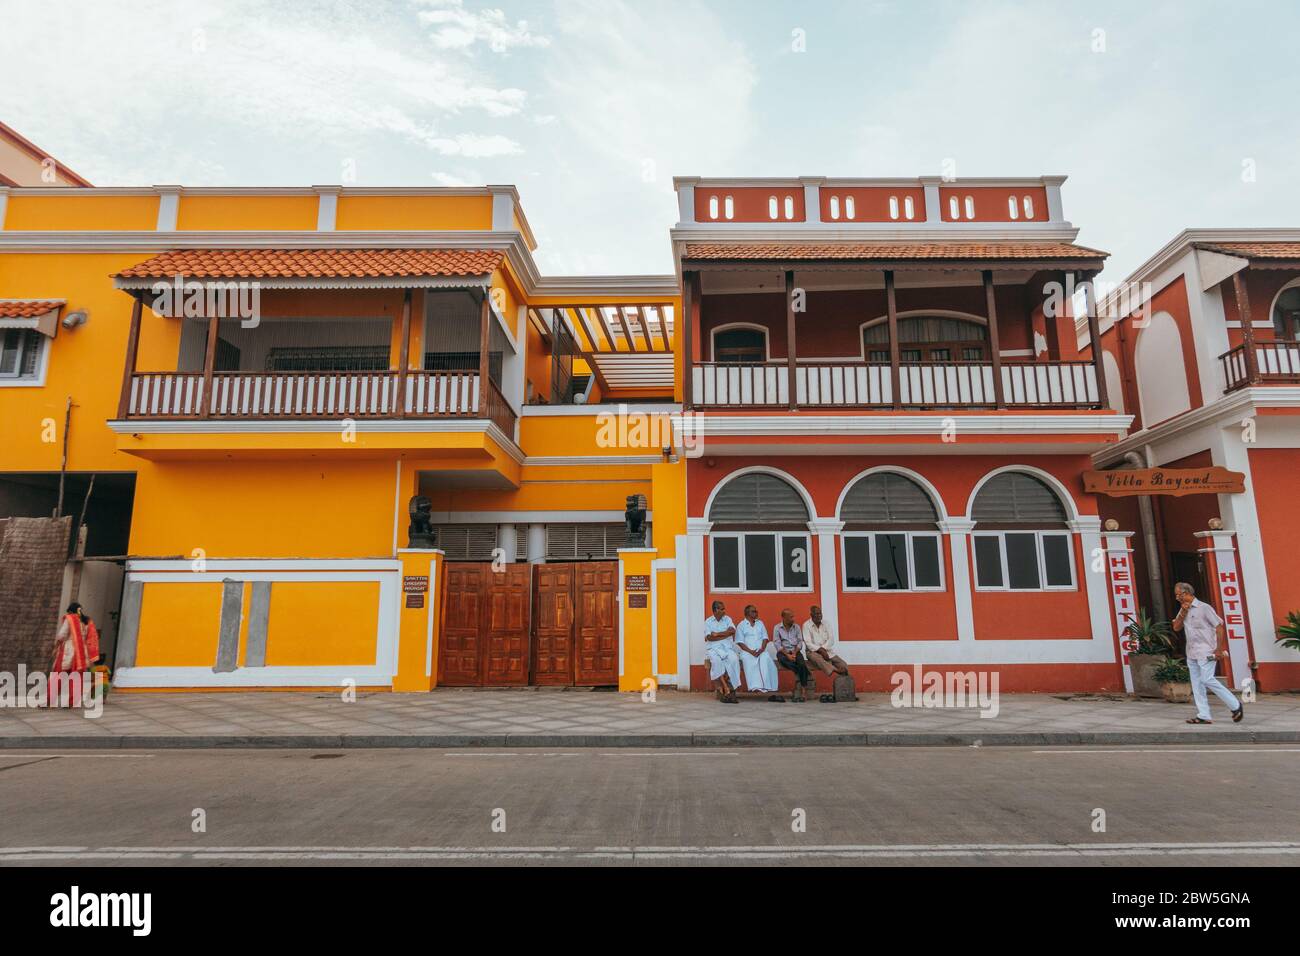 Four men sit on a bench in front of colourful French colonial era buildings in White Town, Pondicherry, India Stock Photo